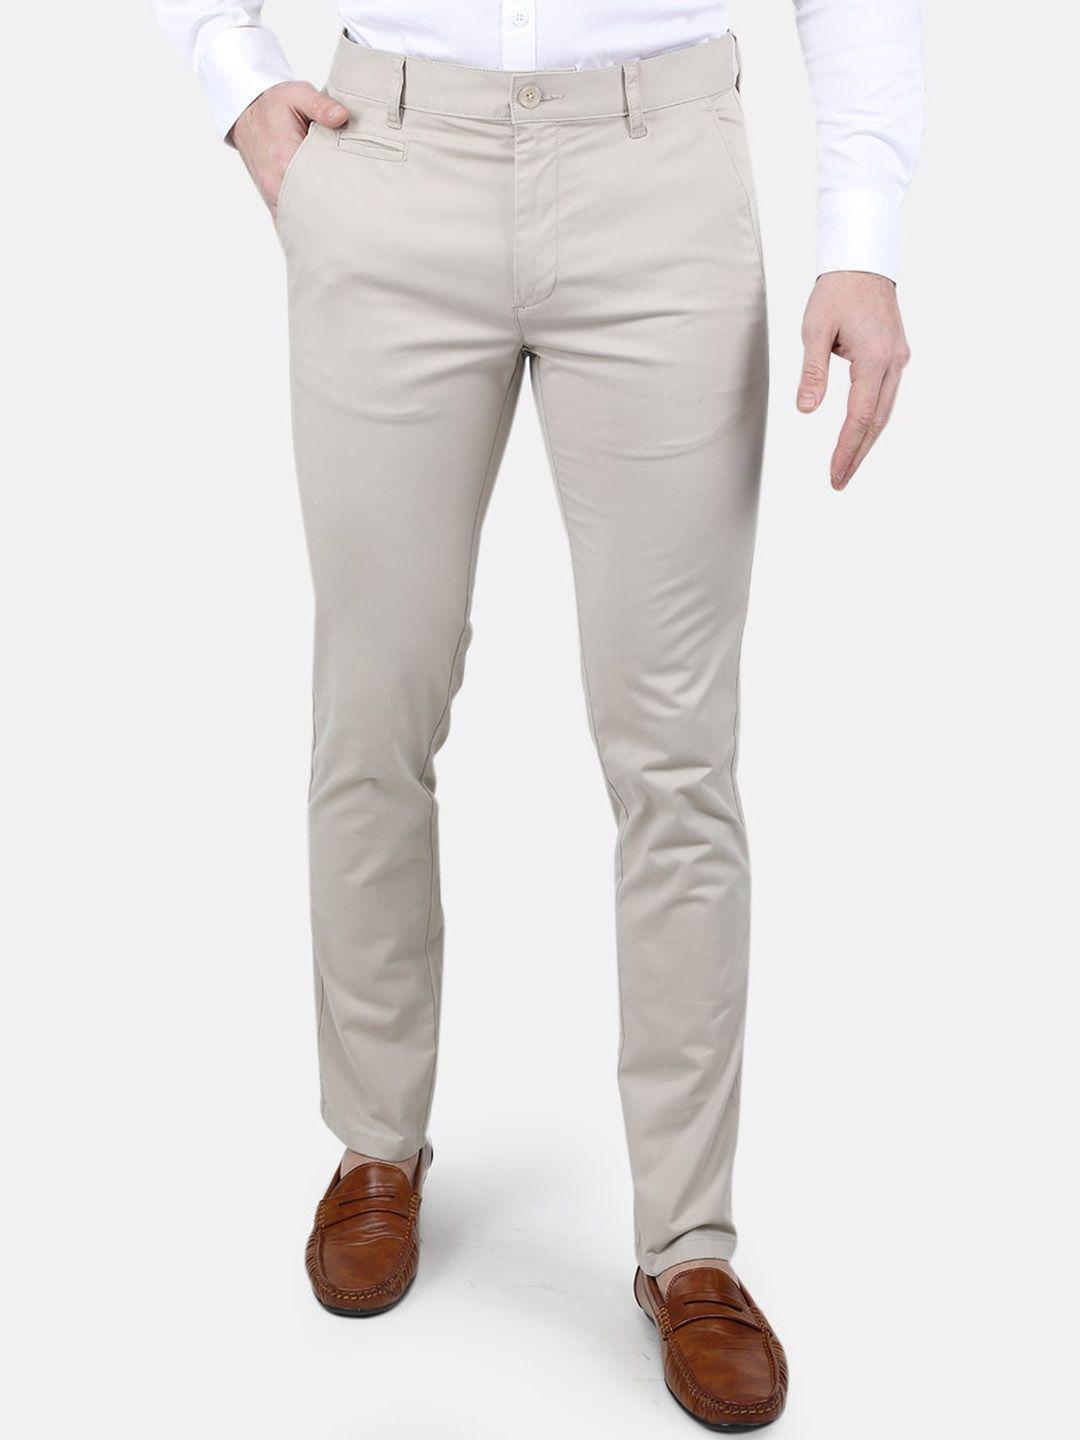 monte-carlo-men-flat-front-mid-rise-regular-trousers